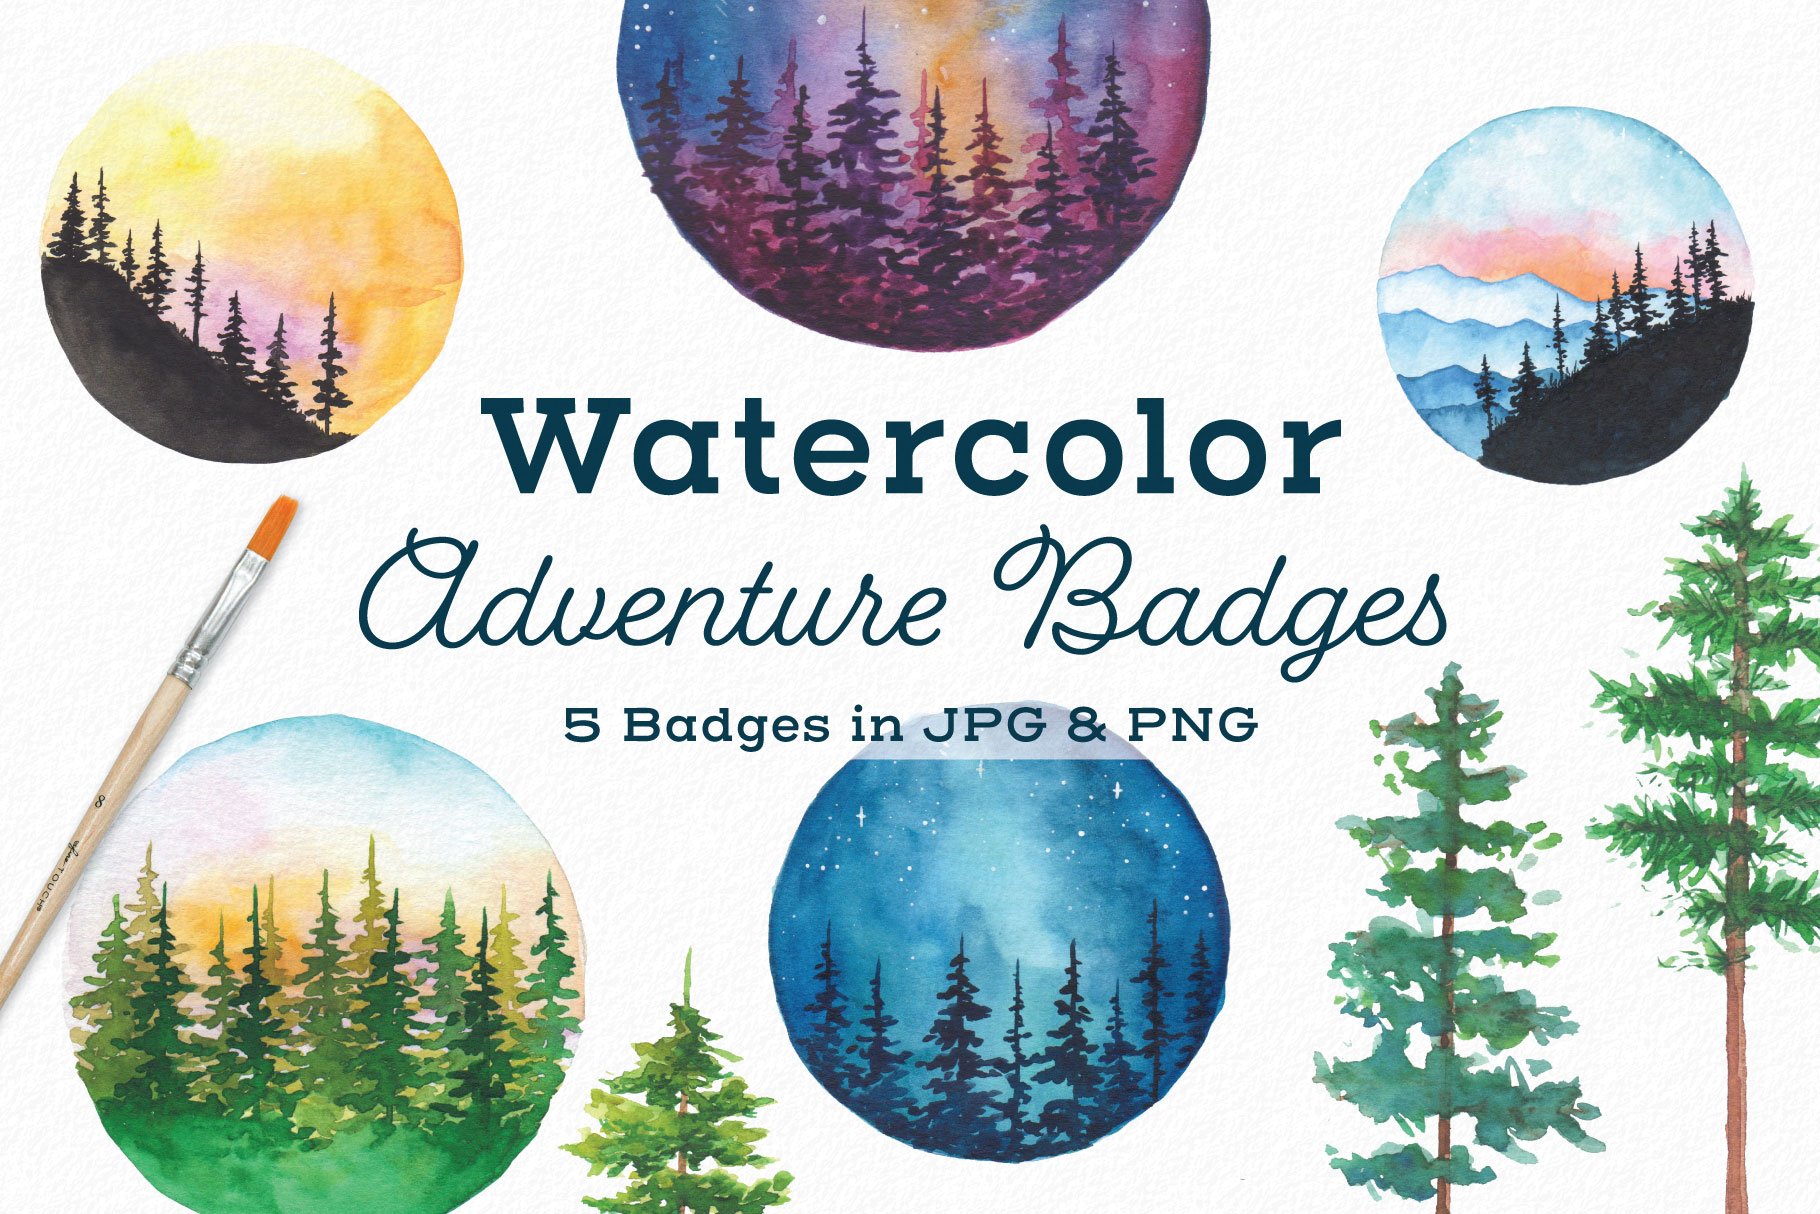 Watercolor adventure badges with trees and mountains.